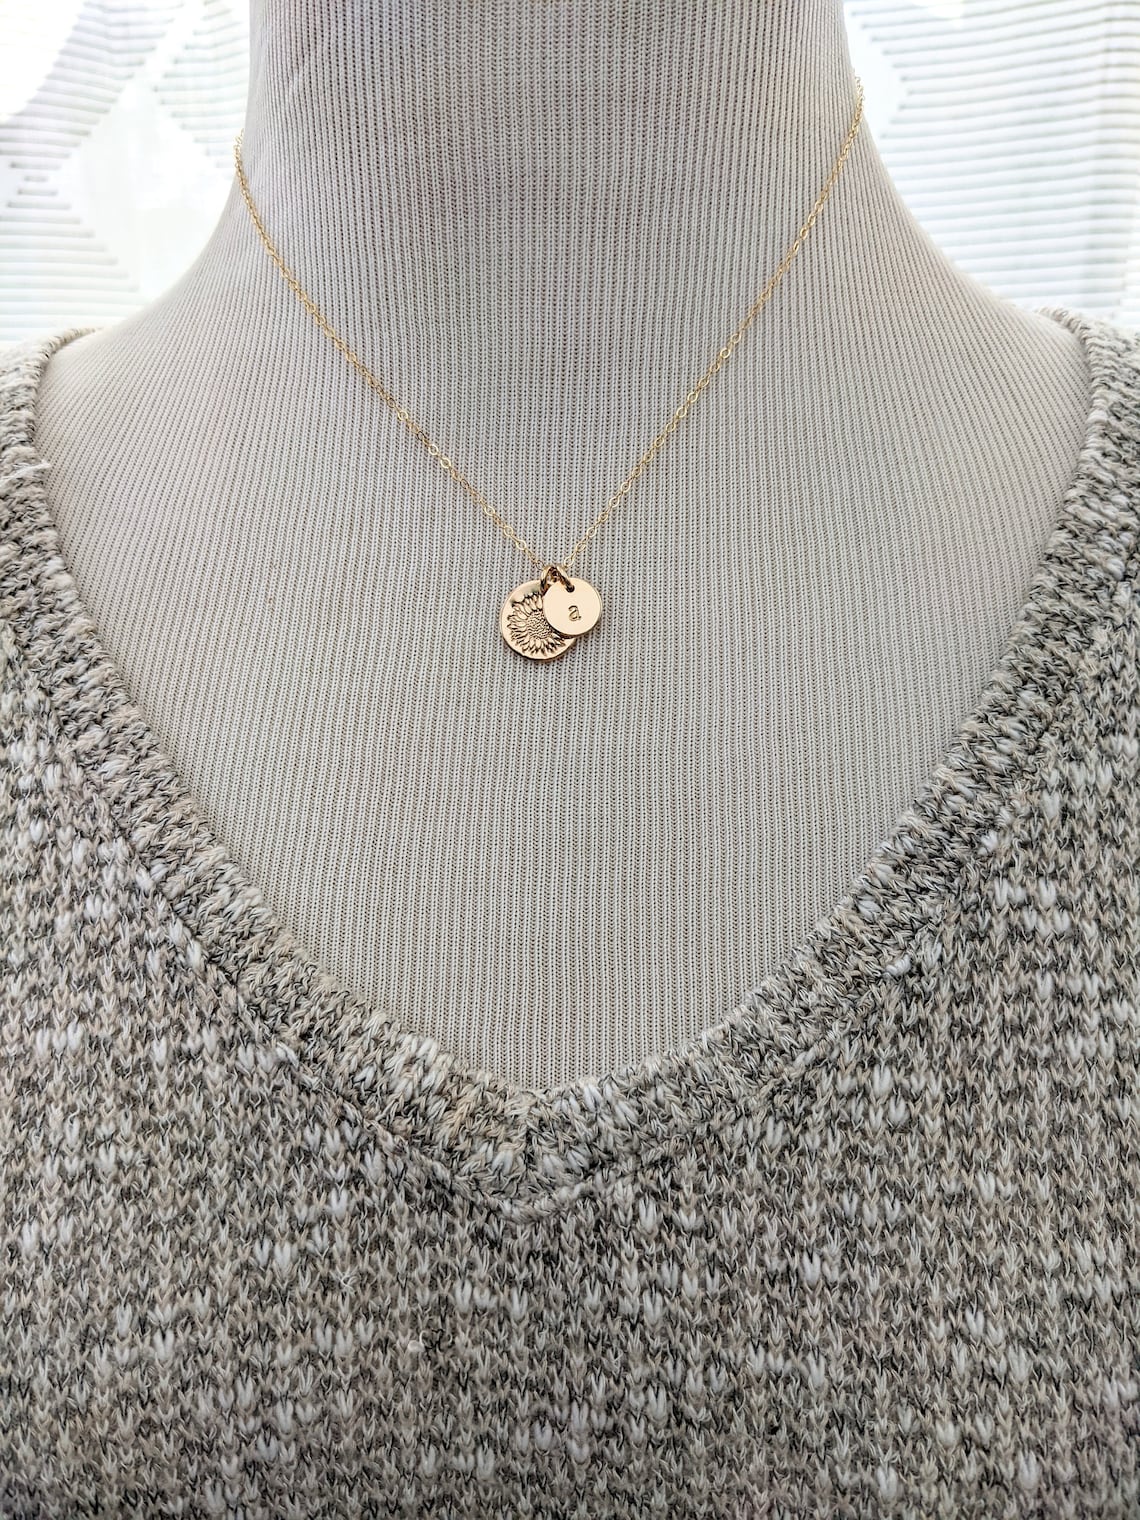 Personalized Sunflower Necklace with Initial